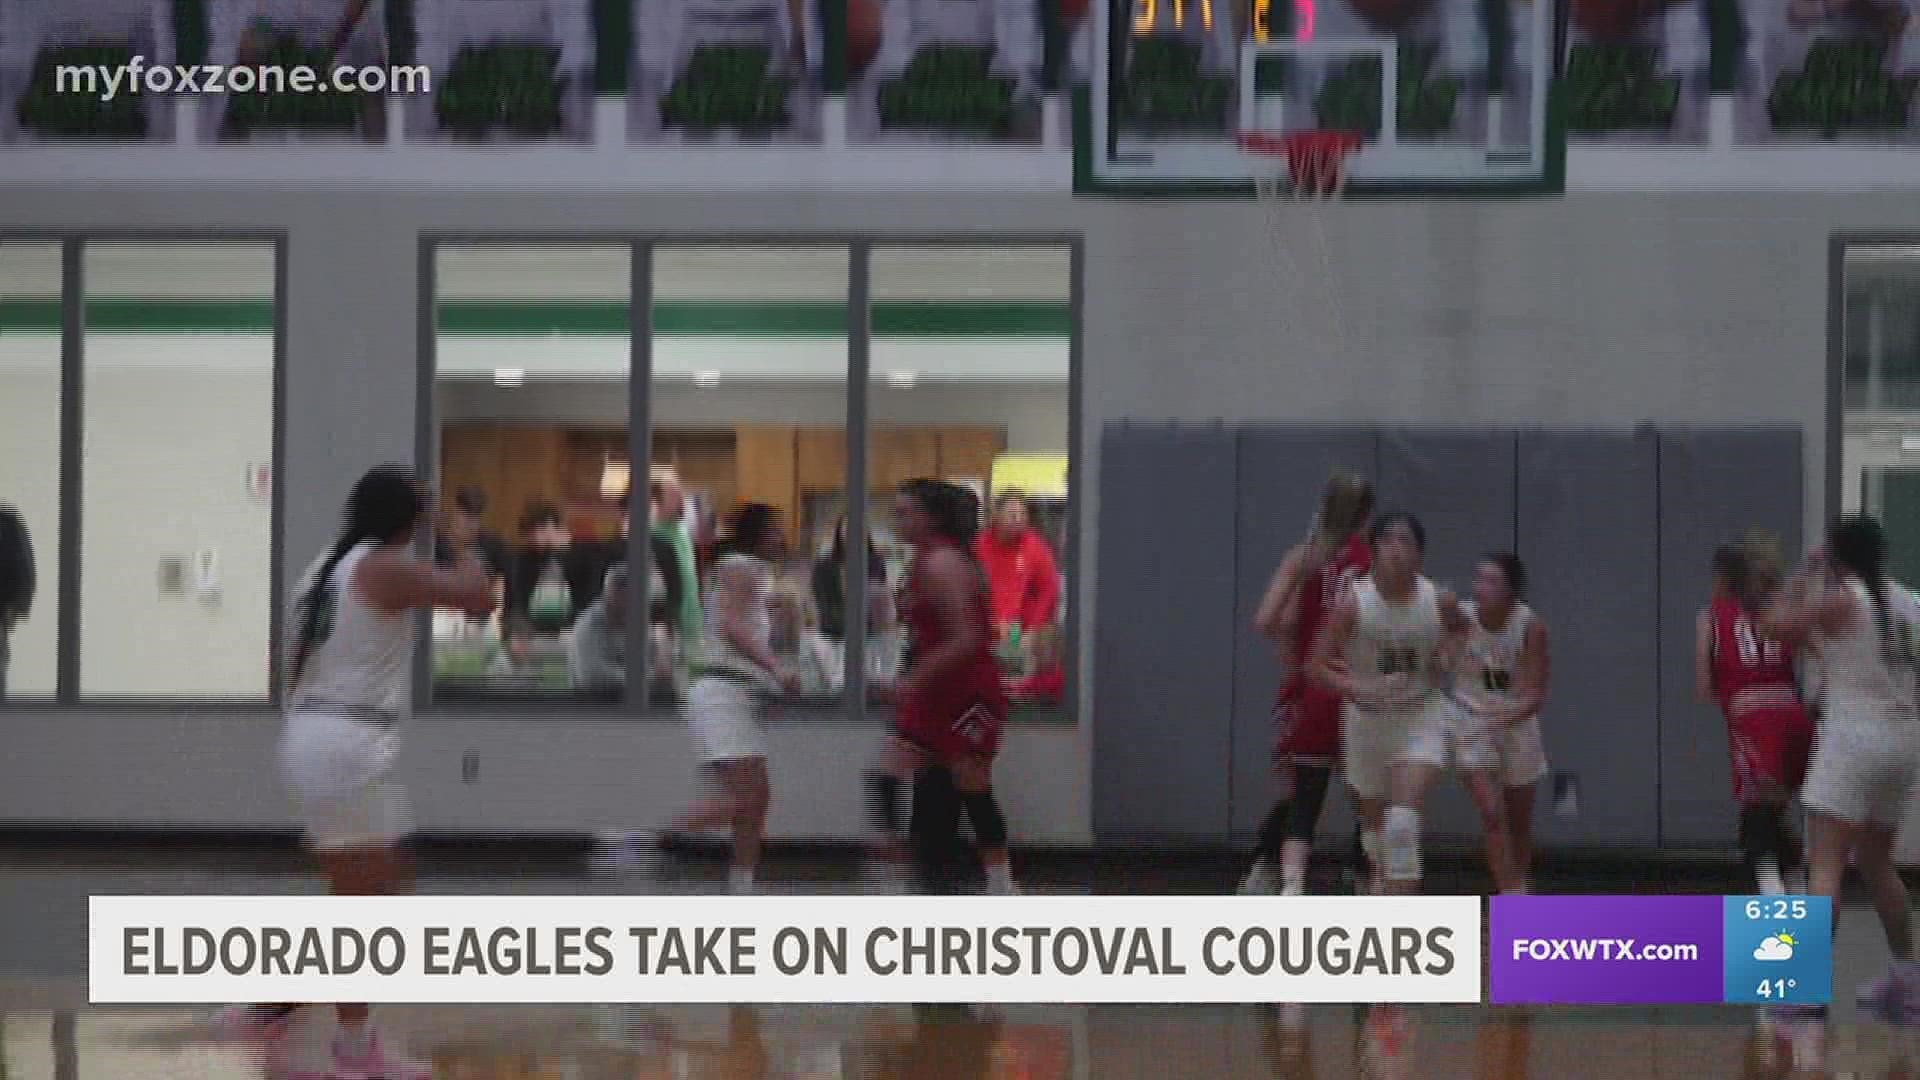 One of tonight's games features a rivalry game between the Christoval Cougars and the Eldorado Eagles.